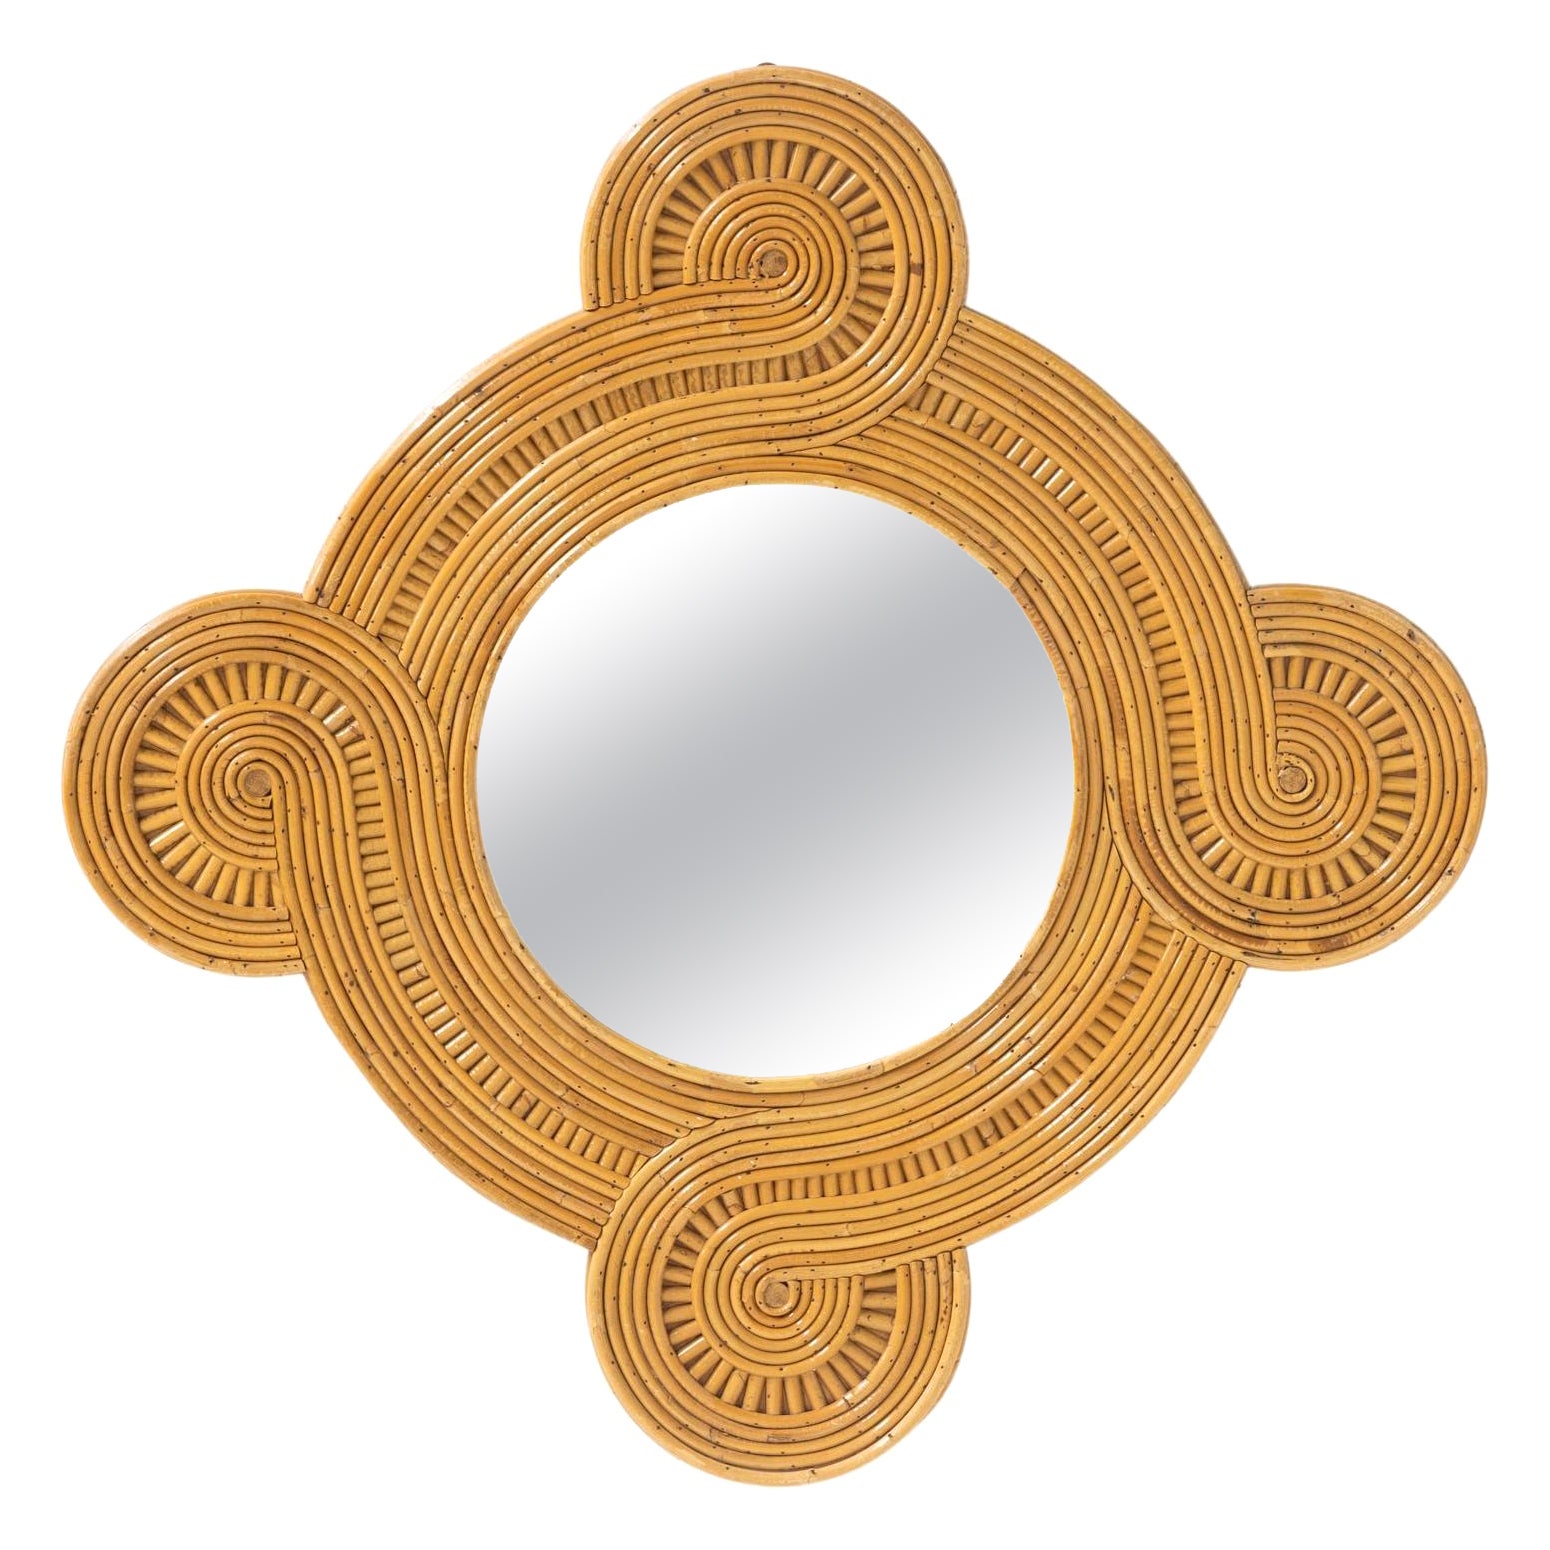 Bamboo Tropicalist Mirror by Vivai del Sud, 1960s